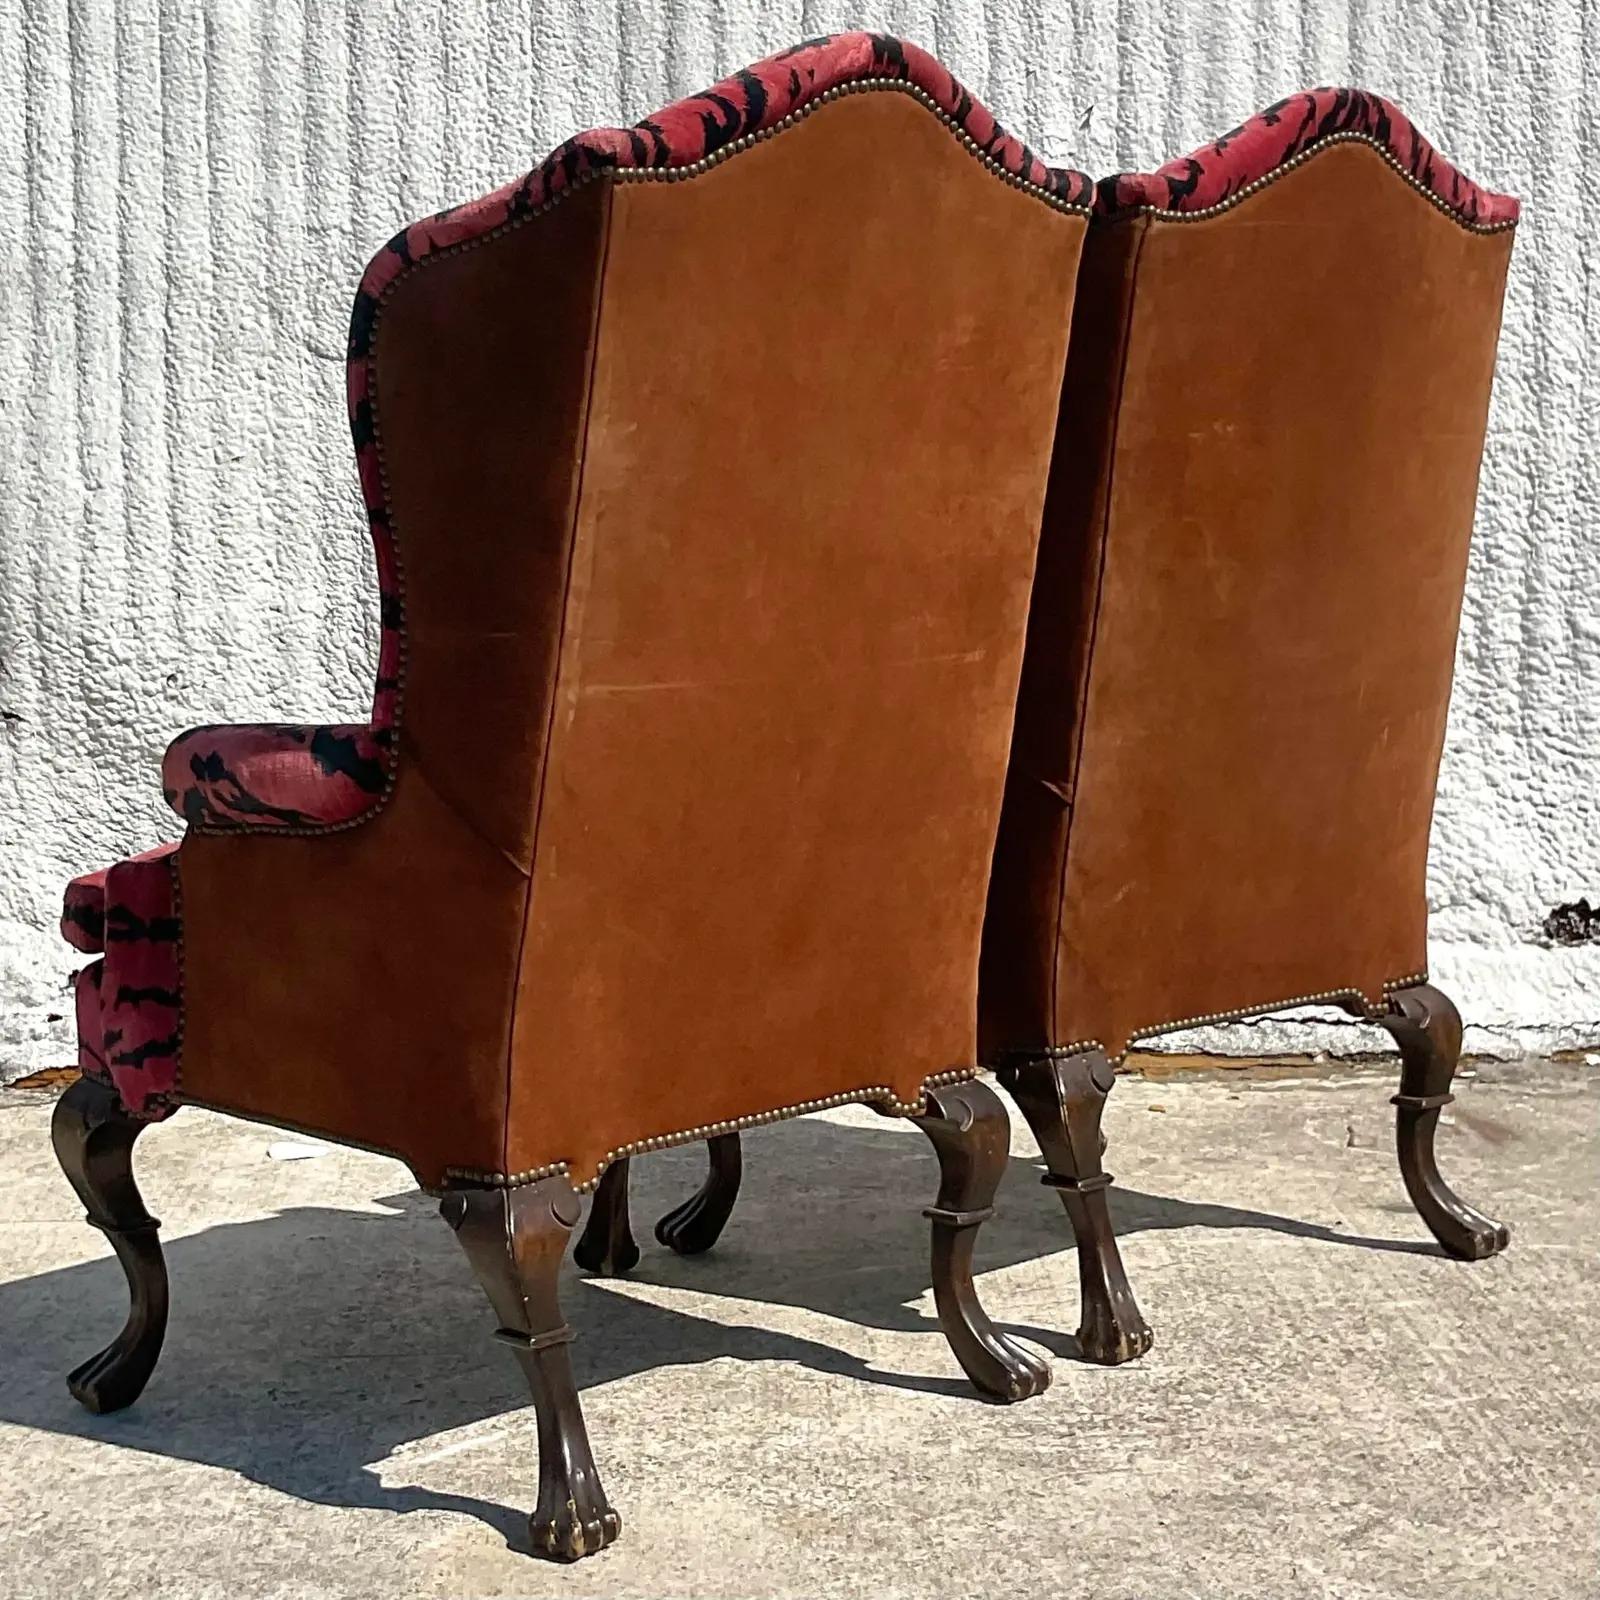 A fantastic pair of vintage Regency wingback chairs. Covered in the legendary Scalamandre. “Le Tiger” velvet. Wrapped in a caramel suede. Beautiful carved cabriolet legs.